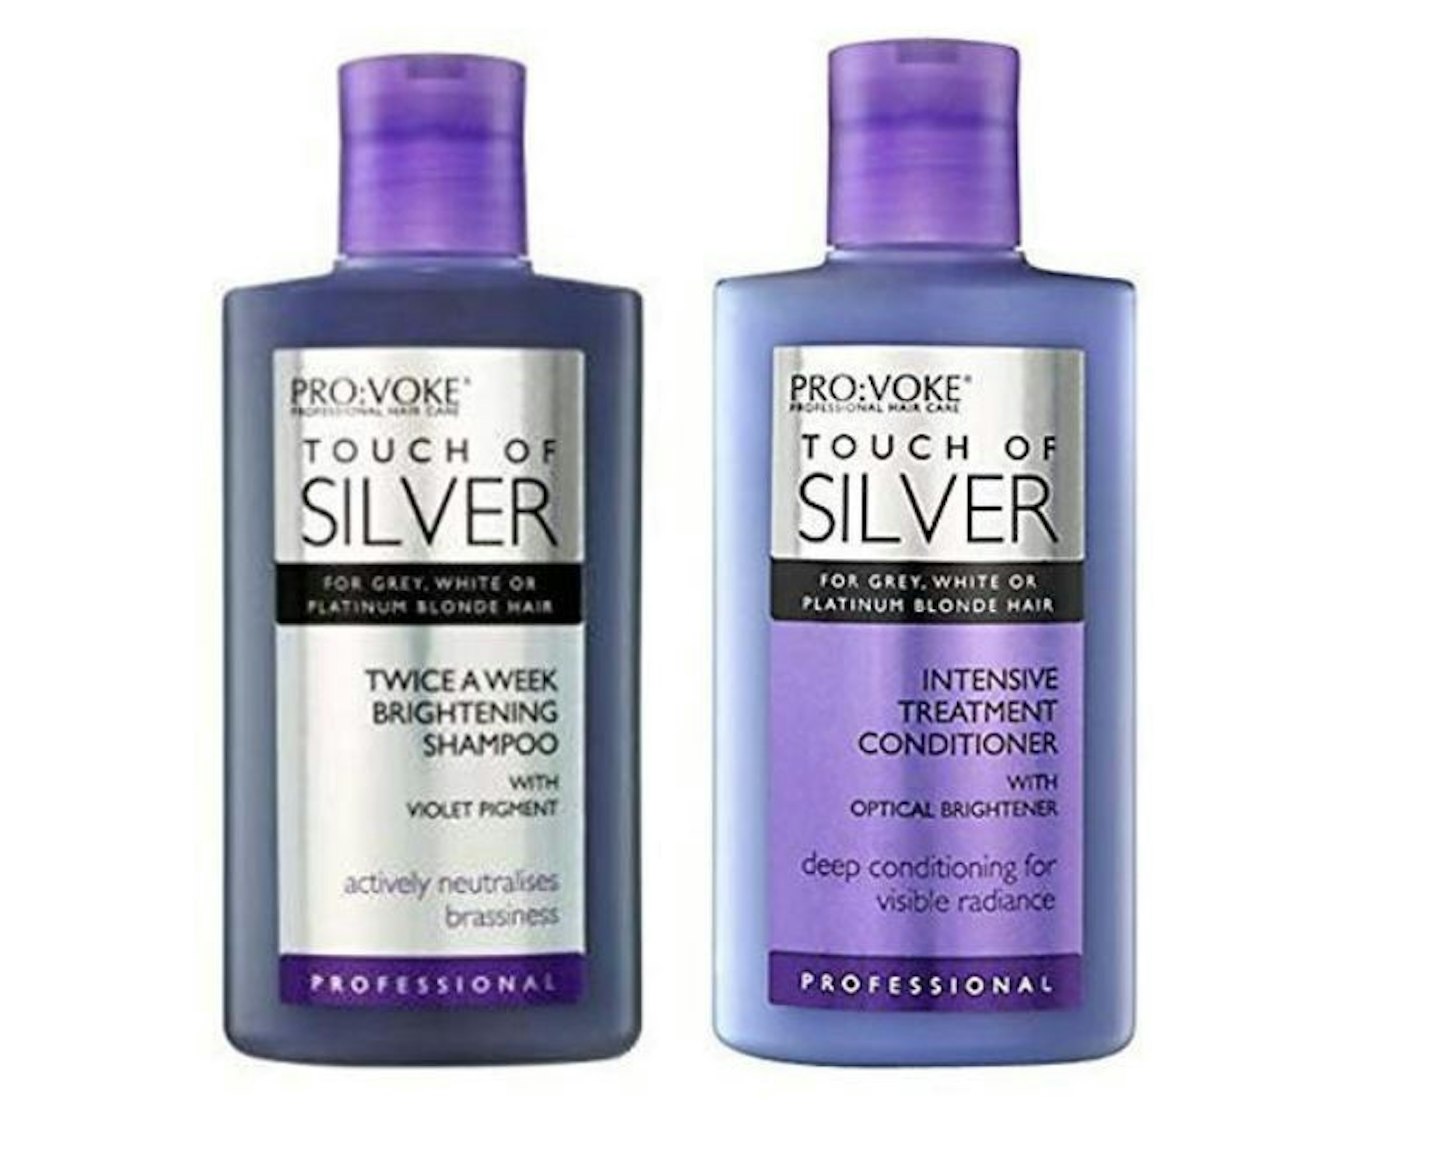 PRO:VOKE Touch of Silver Shampoo and Conditioner, £5.30